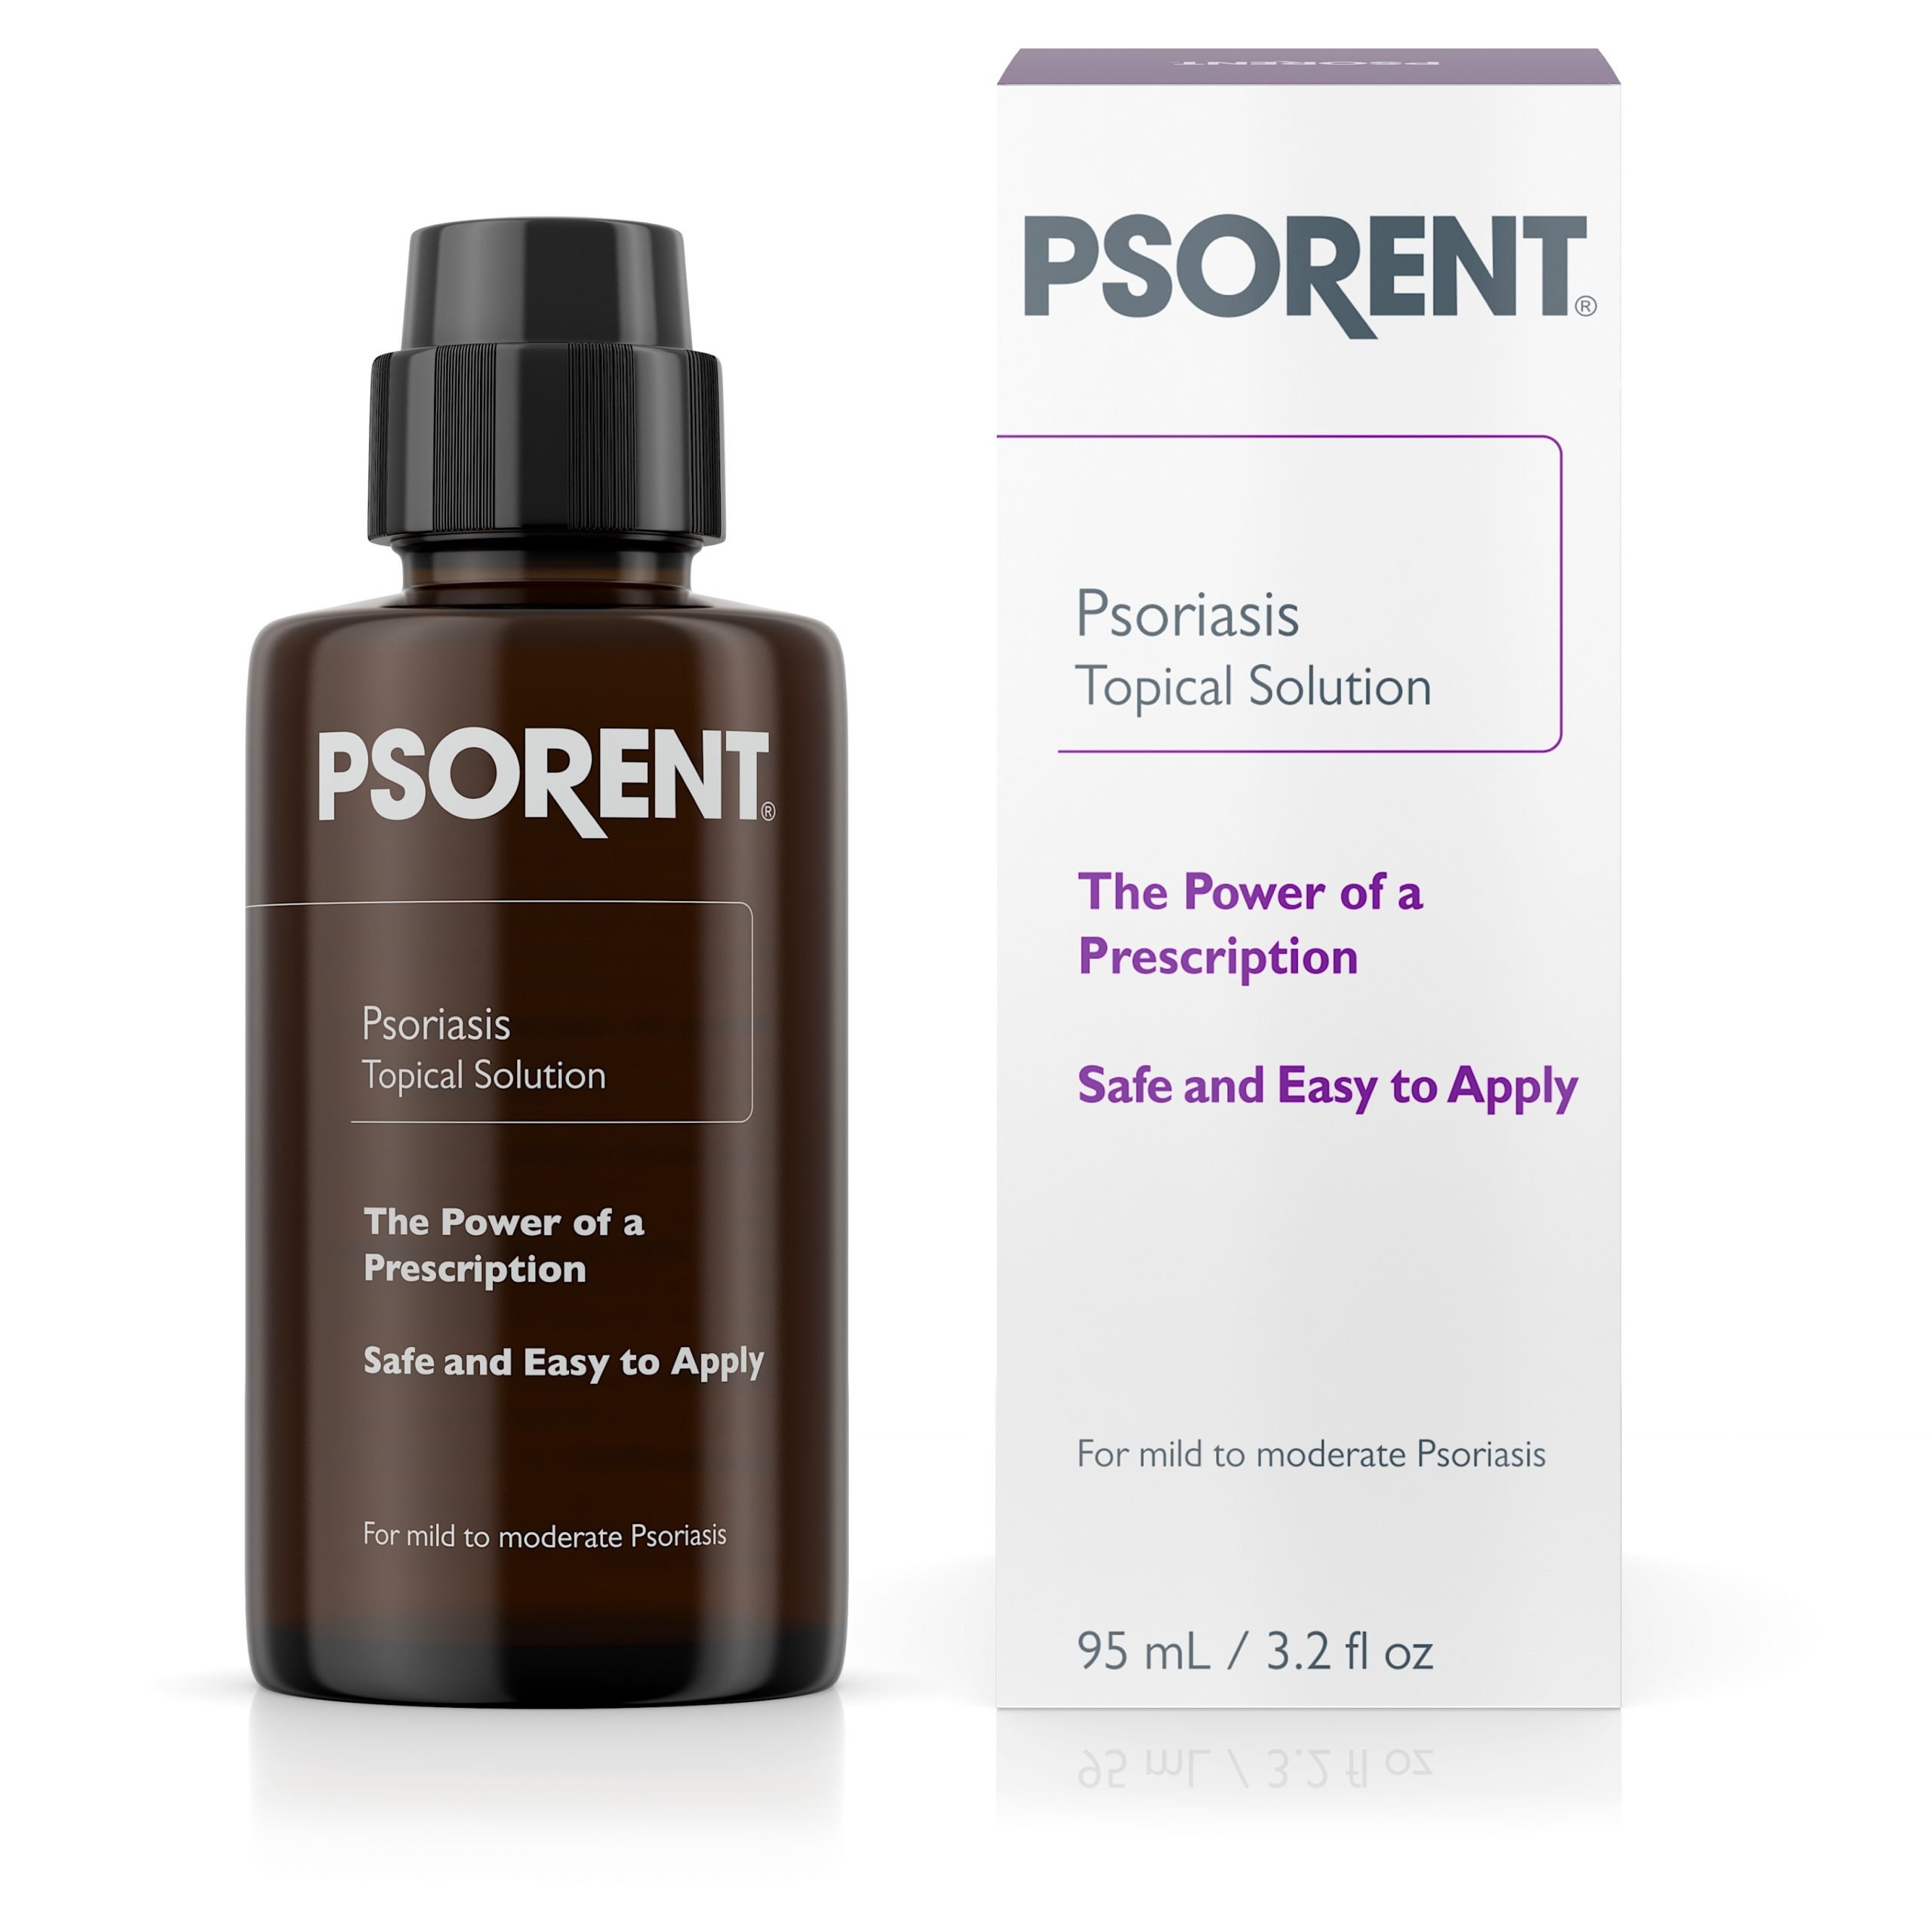 Psorent Over the Counter Topical Psoriasis Treatment, 3.2 fl. oz ...